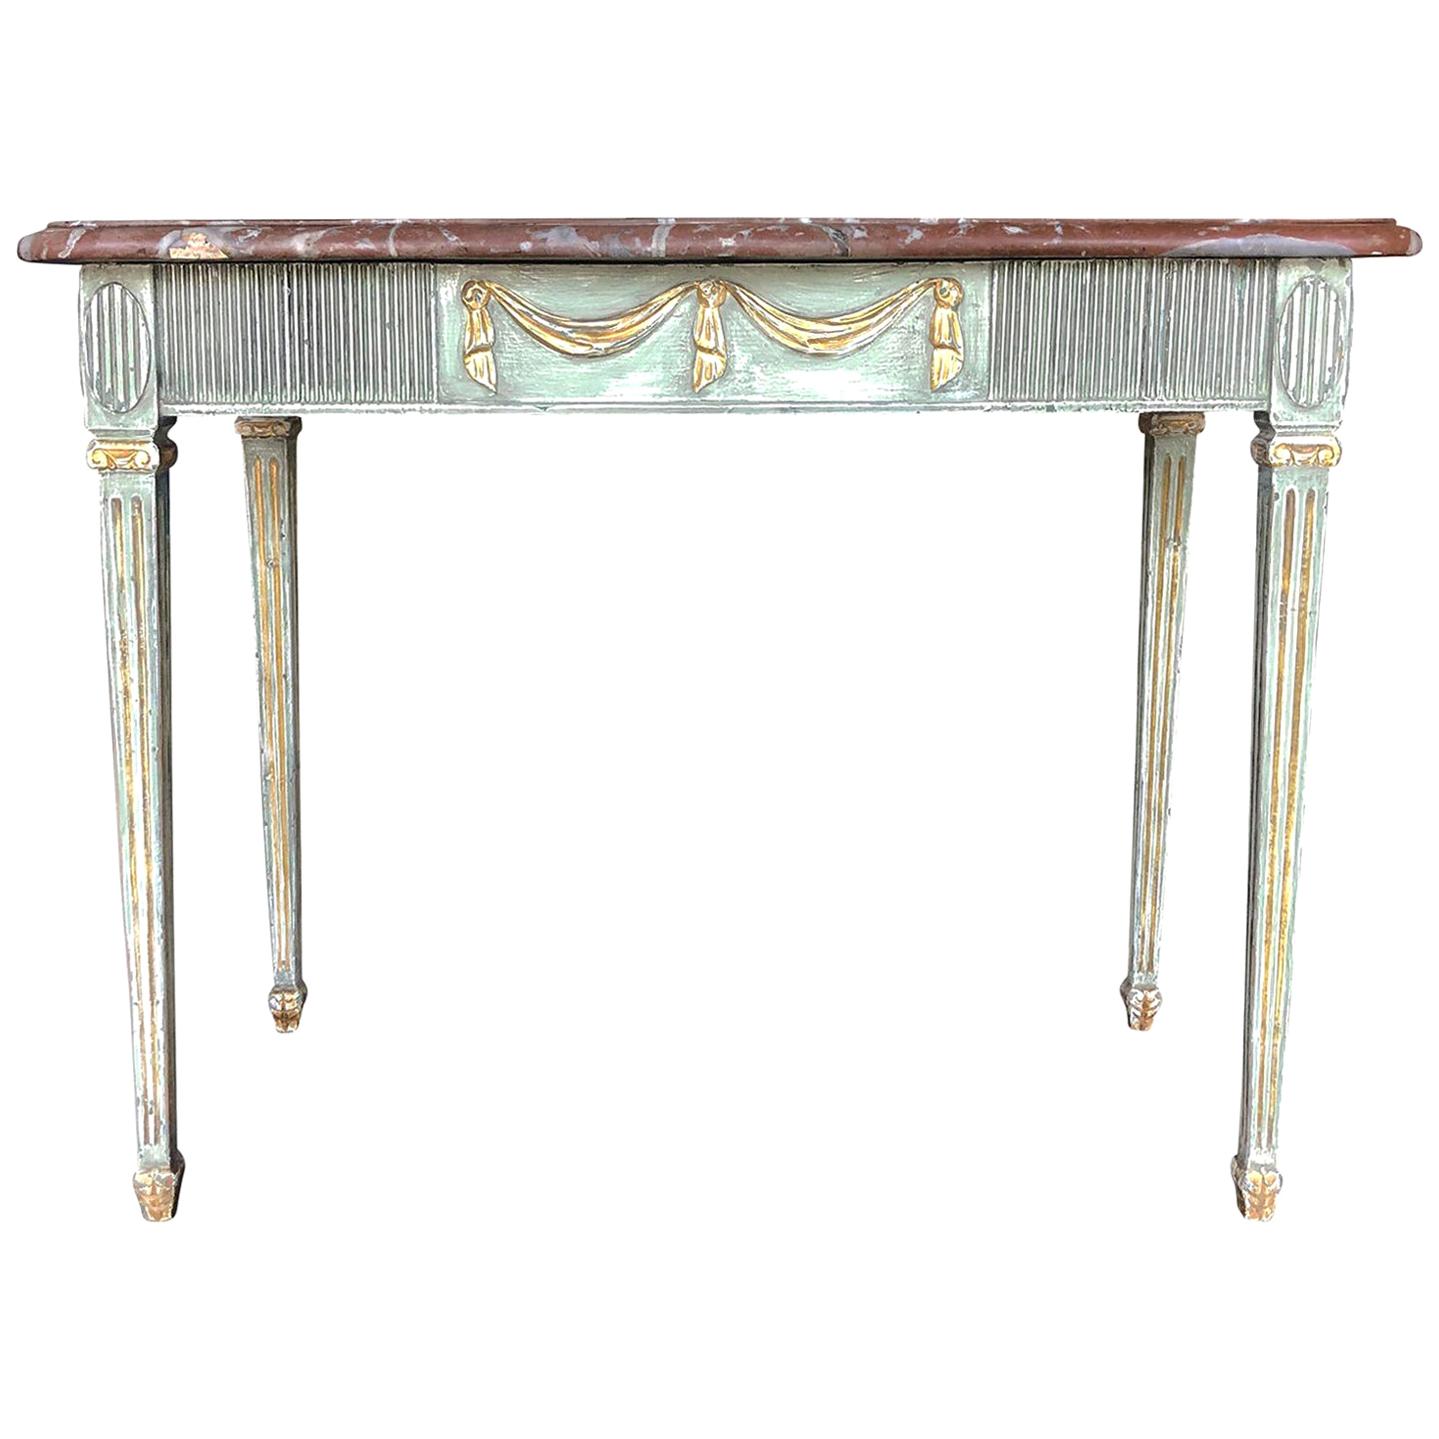 18th Century Green Swedish Gustavian Console Table, Freestanding Giltwood Table